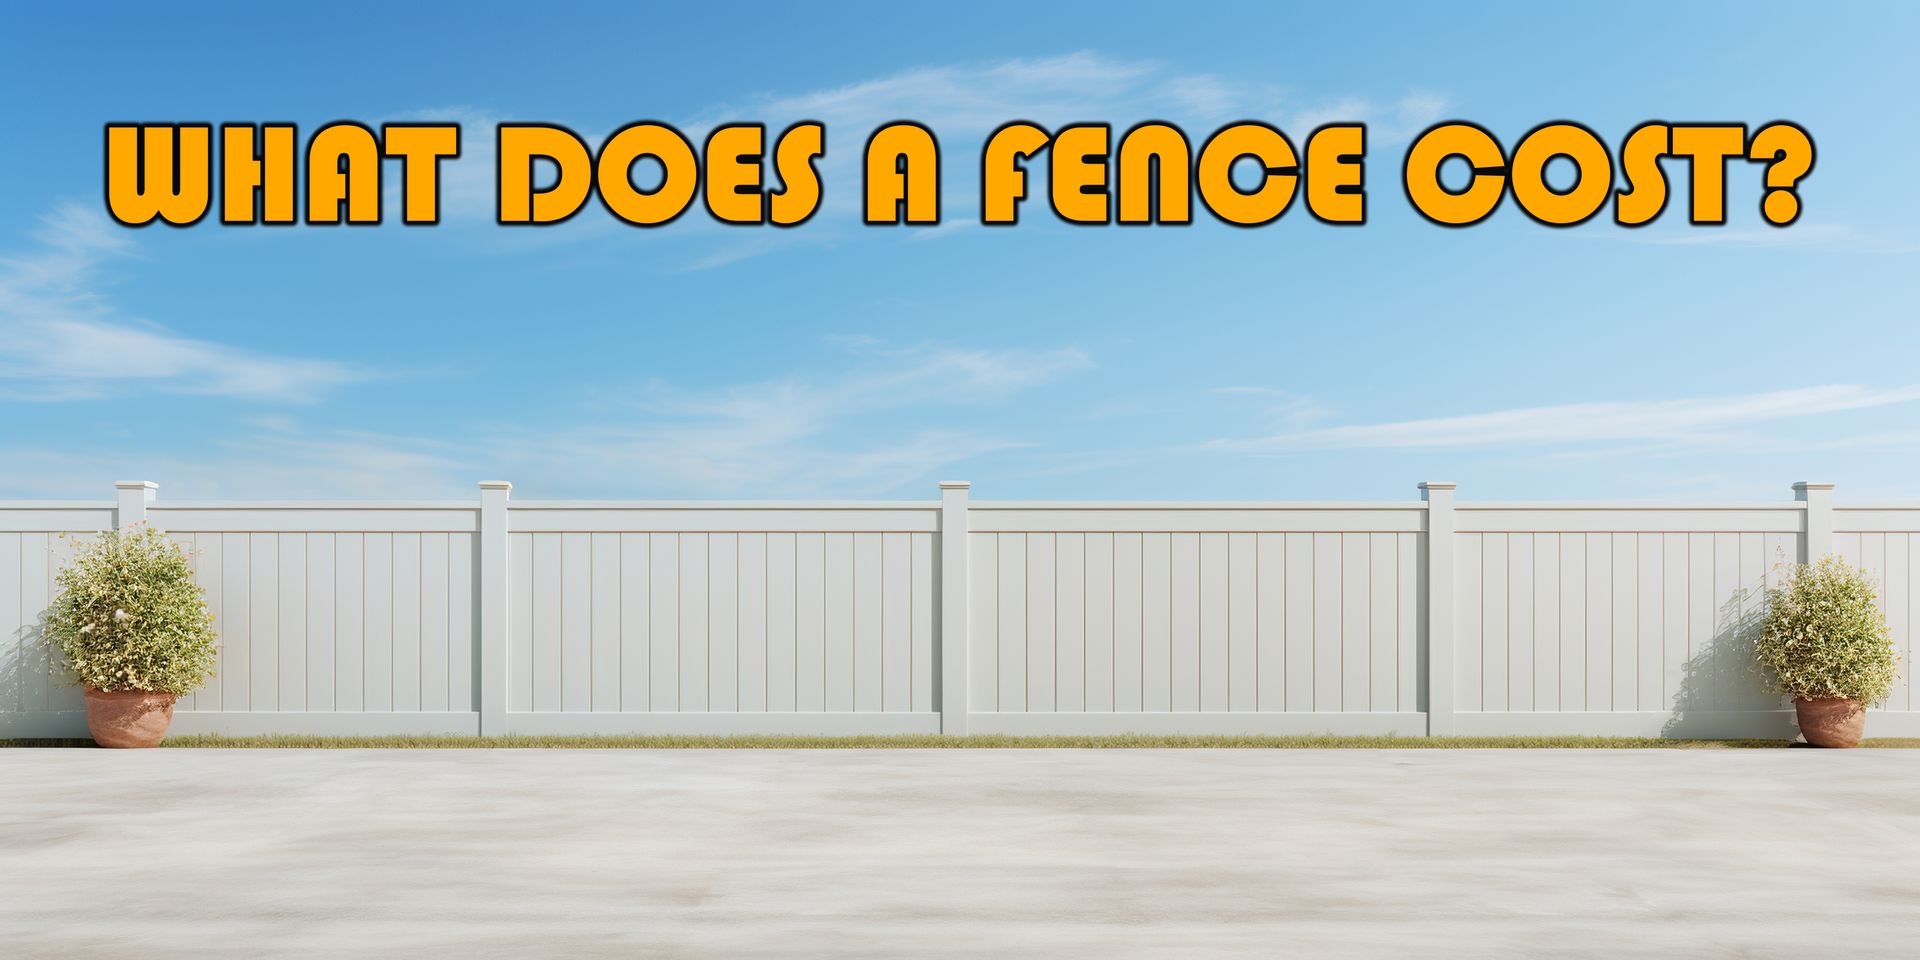 WHAT DOES A FENCE COST